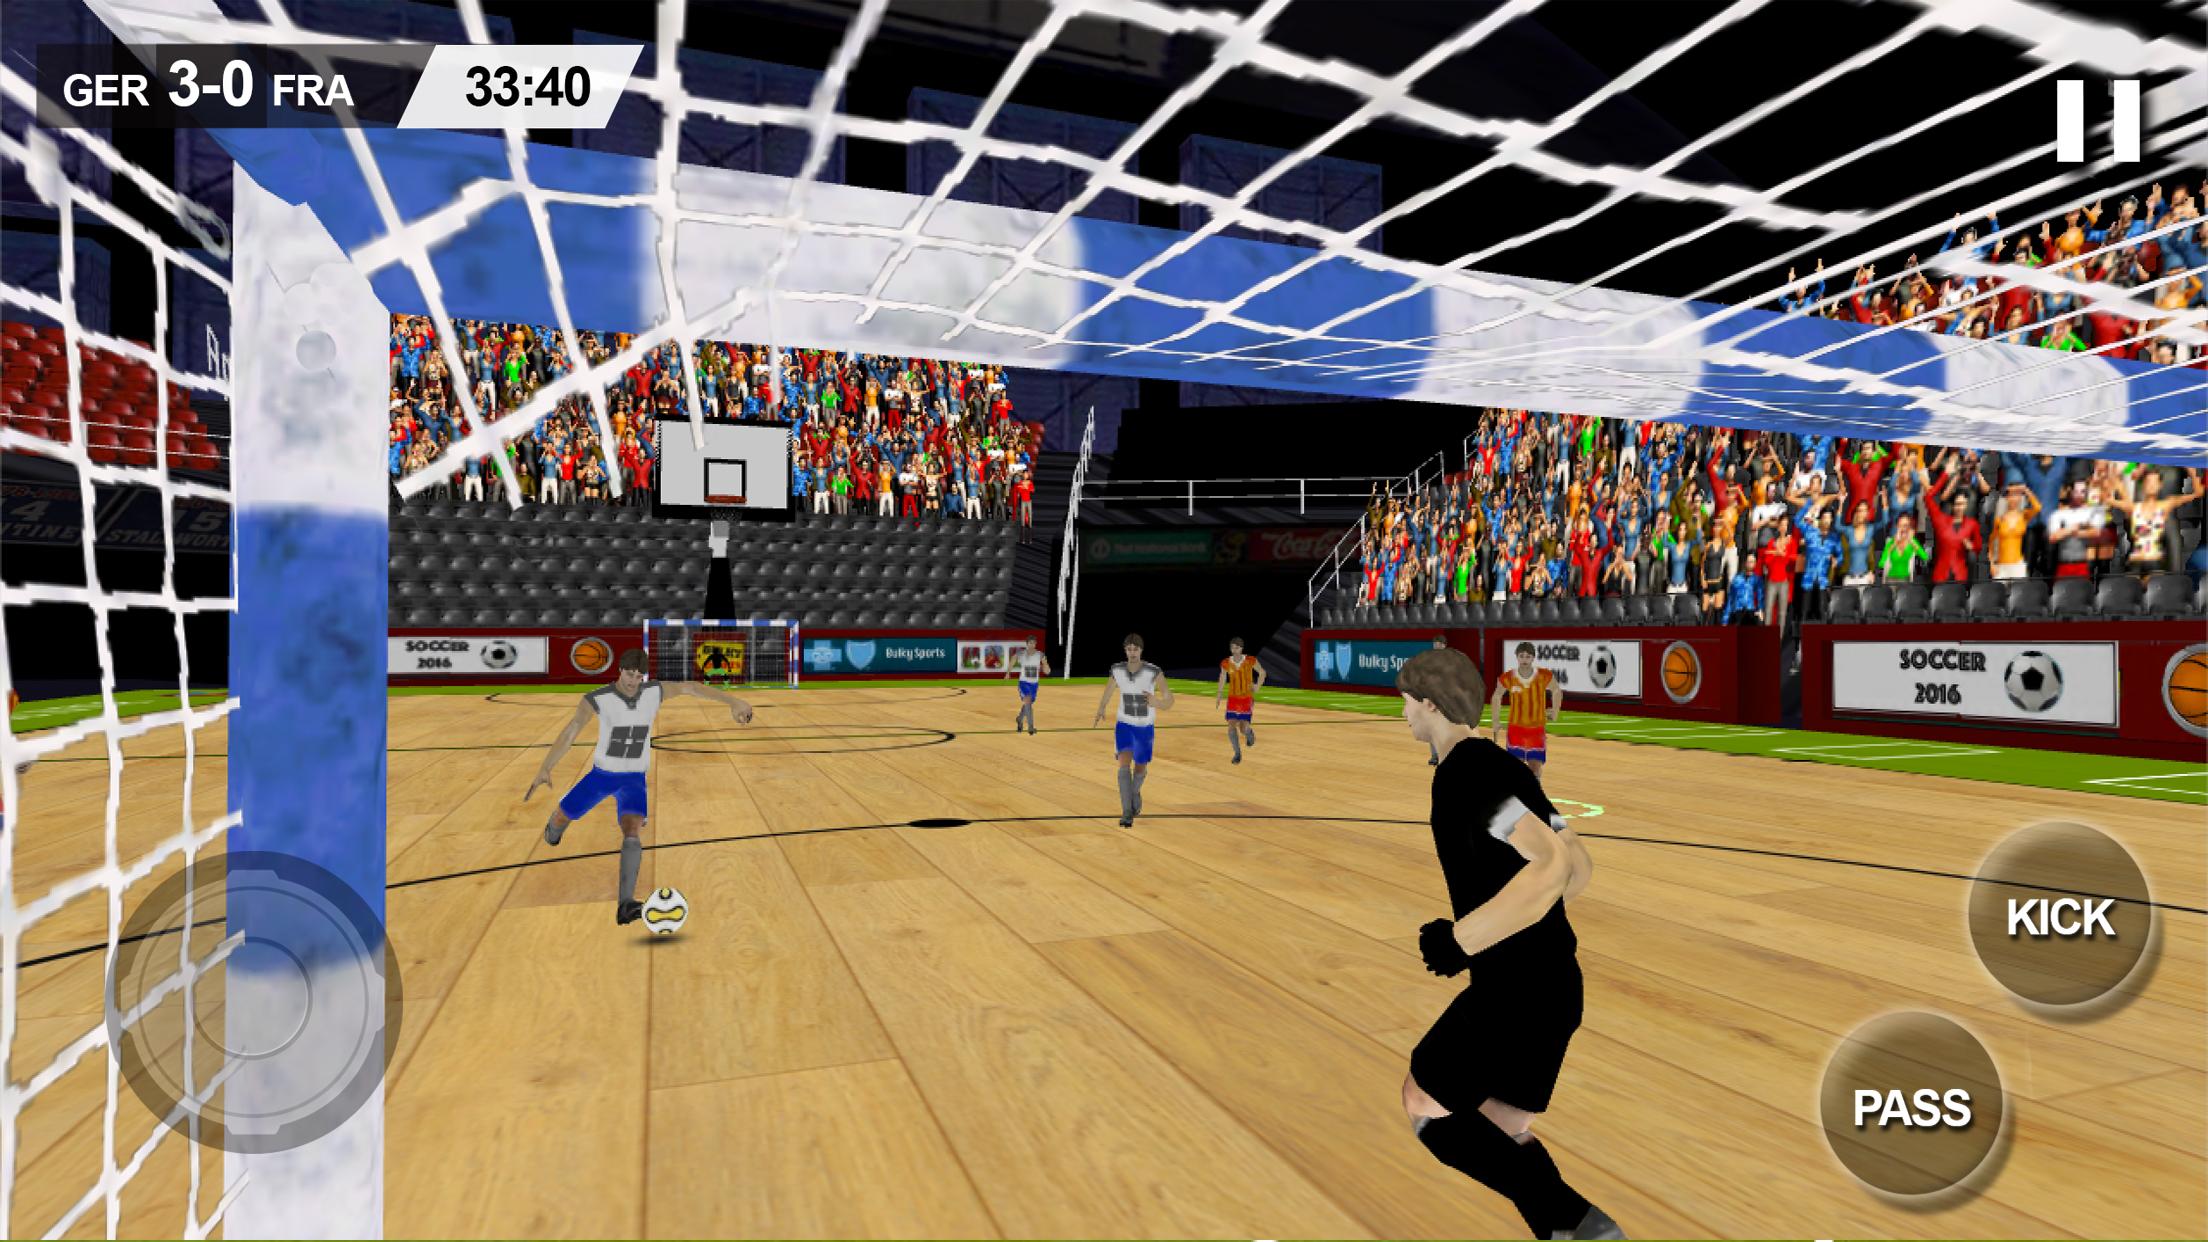 Android application Indoor Soccer Game 2016 screenshort